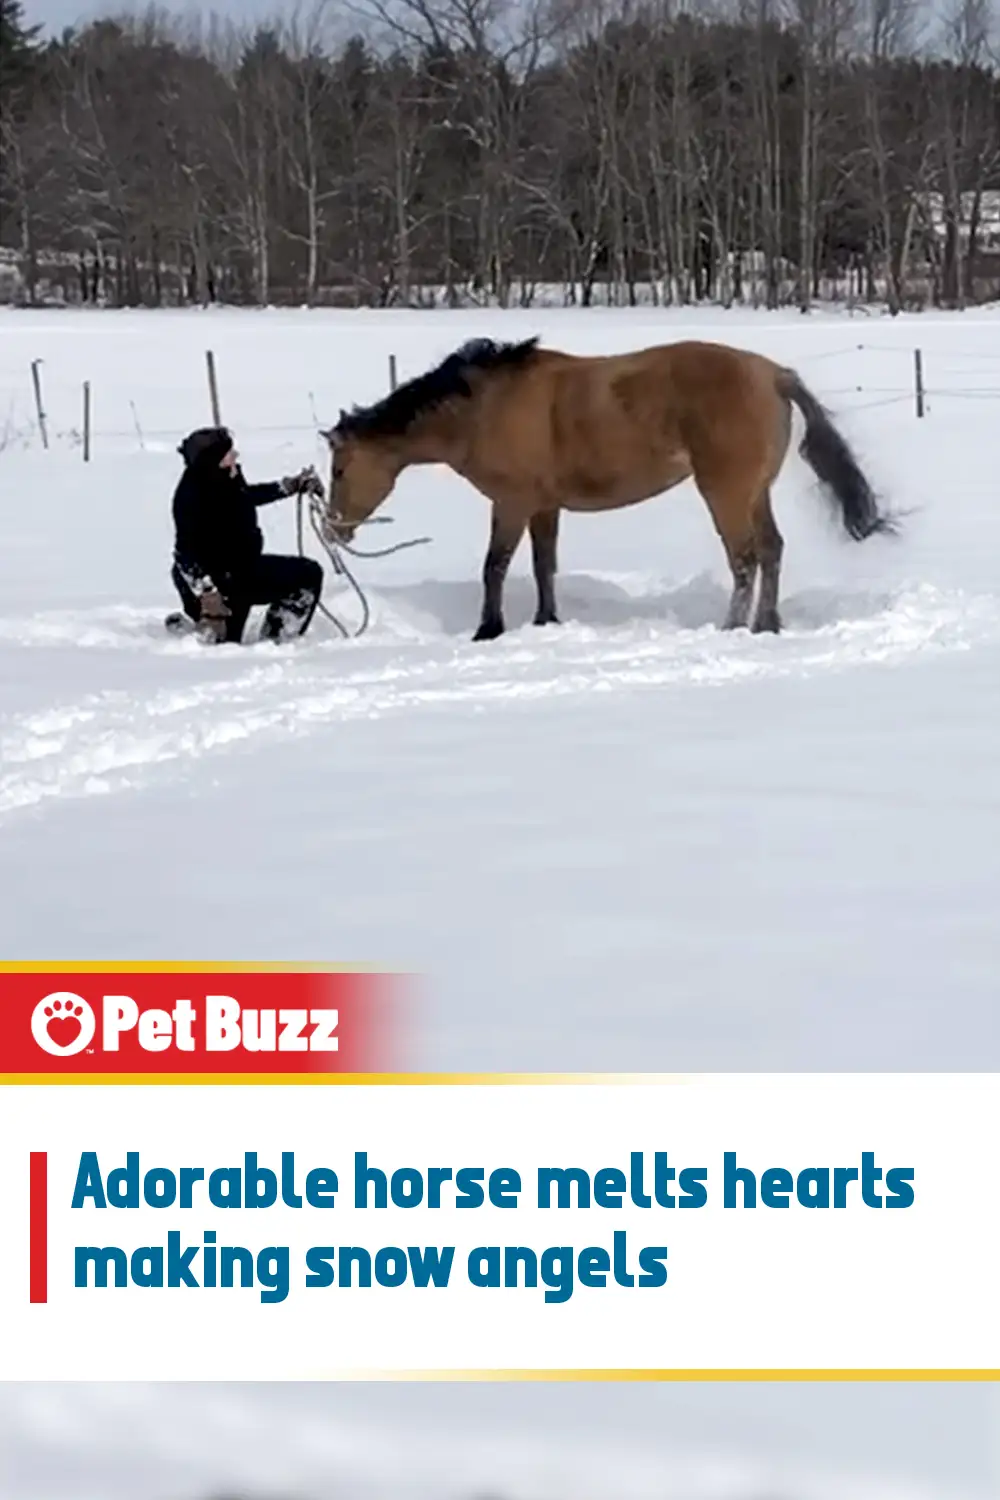 Adorable horse melts hearts making snow angels